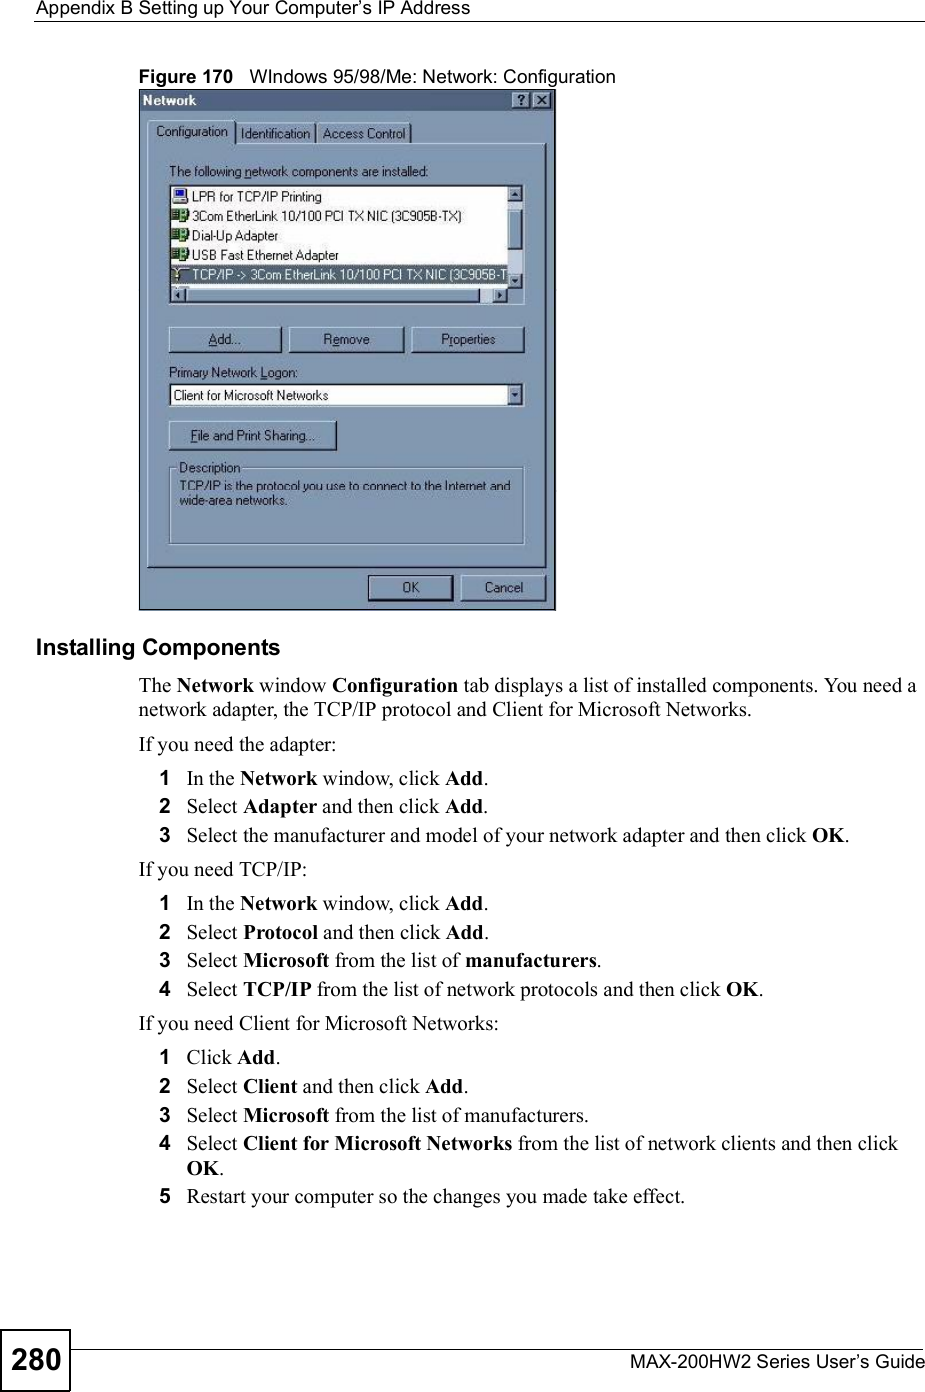 Appendix BSetting up Your Computer s IP AddressMAX-200HW2 Series User s Guide280Figure 170   WIndows 95/98/Me: Network: ConfigurationInstalling ComponentsThe Network window Configuration tab displays a list of installed components. You need a network adapter, the TCP/IP protocol and Client for Microsoft Networks.If you need the adapter:1In the Network window, click Add.2Select Adapter and then click Add.3Select the manufacturer and model of your network adapter and then click OK.If you need TCP/IP:1In the Network window, click Add.2Select Protocol and then click Add.3Select Microsoft from the list of manufacturers.4Select TCP/IP from the list of network protocols and then click OK.If you need Client for Microsoft Networks:1Click Add.2Select Client and then click Add.3Select Microsoft from the list of manufacturers.4Select Client for Microsoft Networks from the list of network clients and then click OK.5Restart your computer so the changes you made take effect.